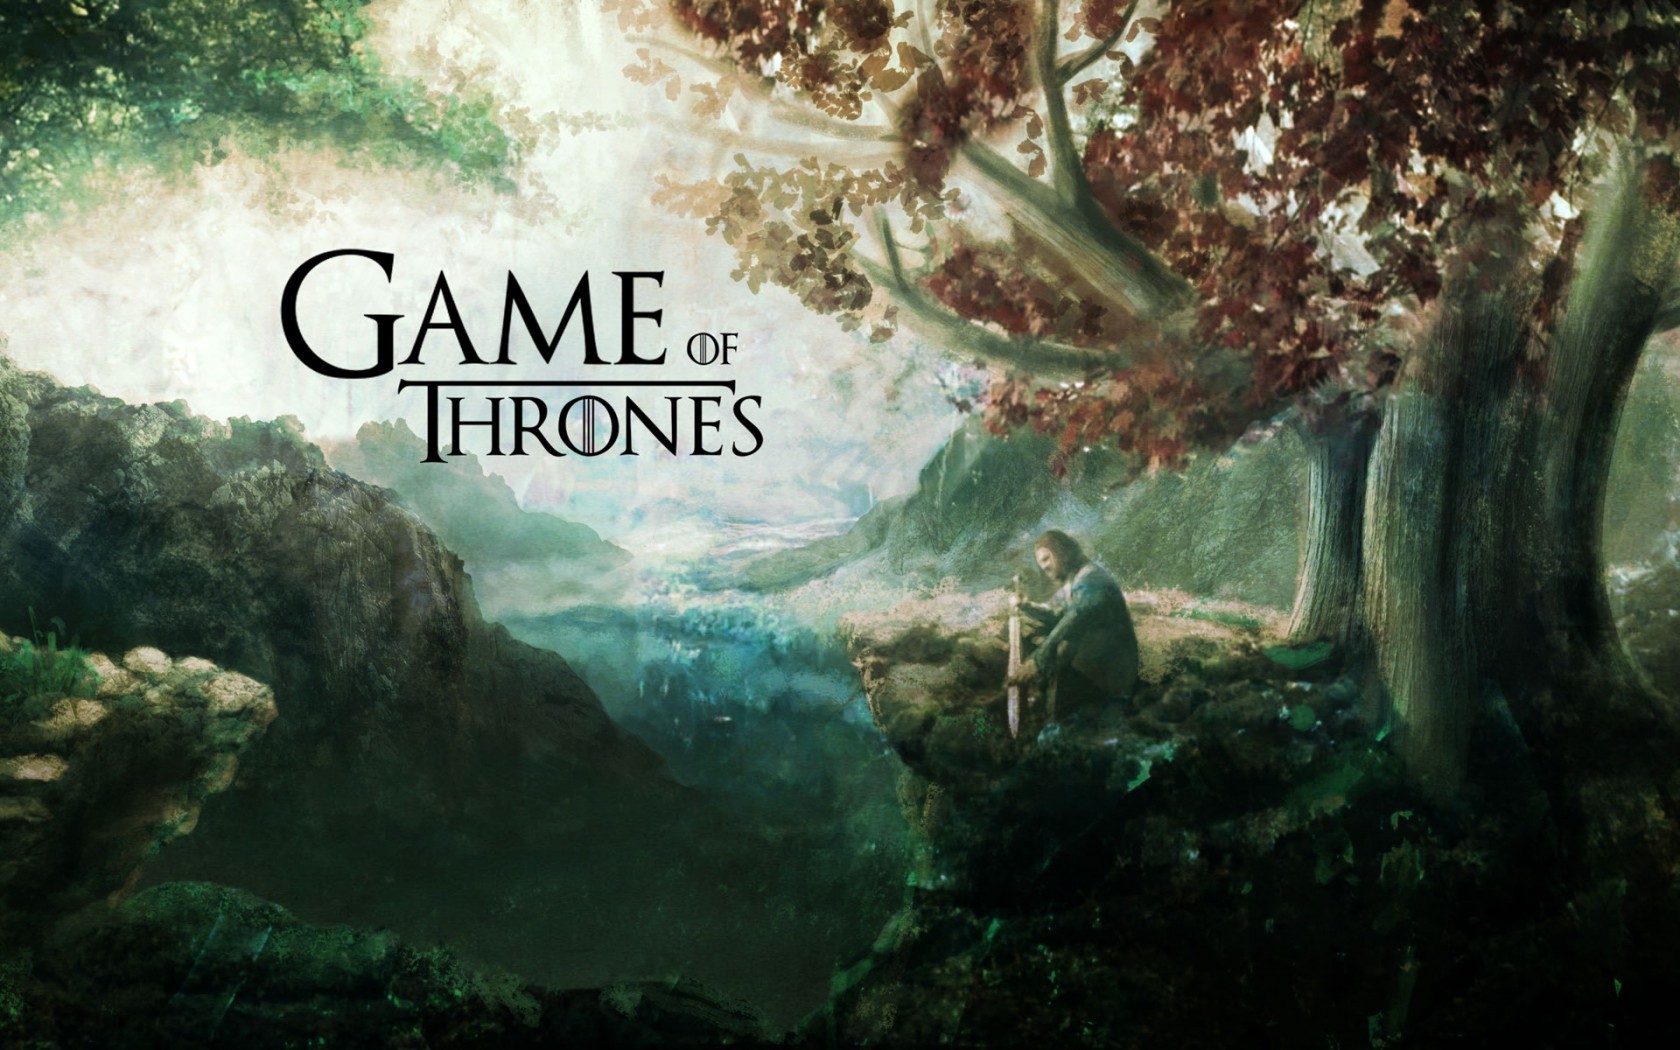 game of thrones hd wallpapers game of thrones hd wallpapers 1680x1050